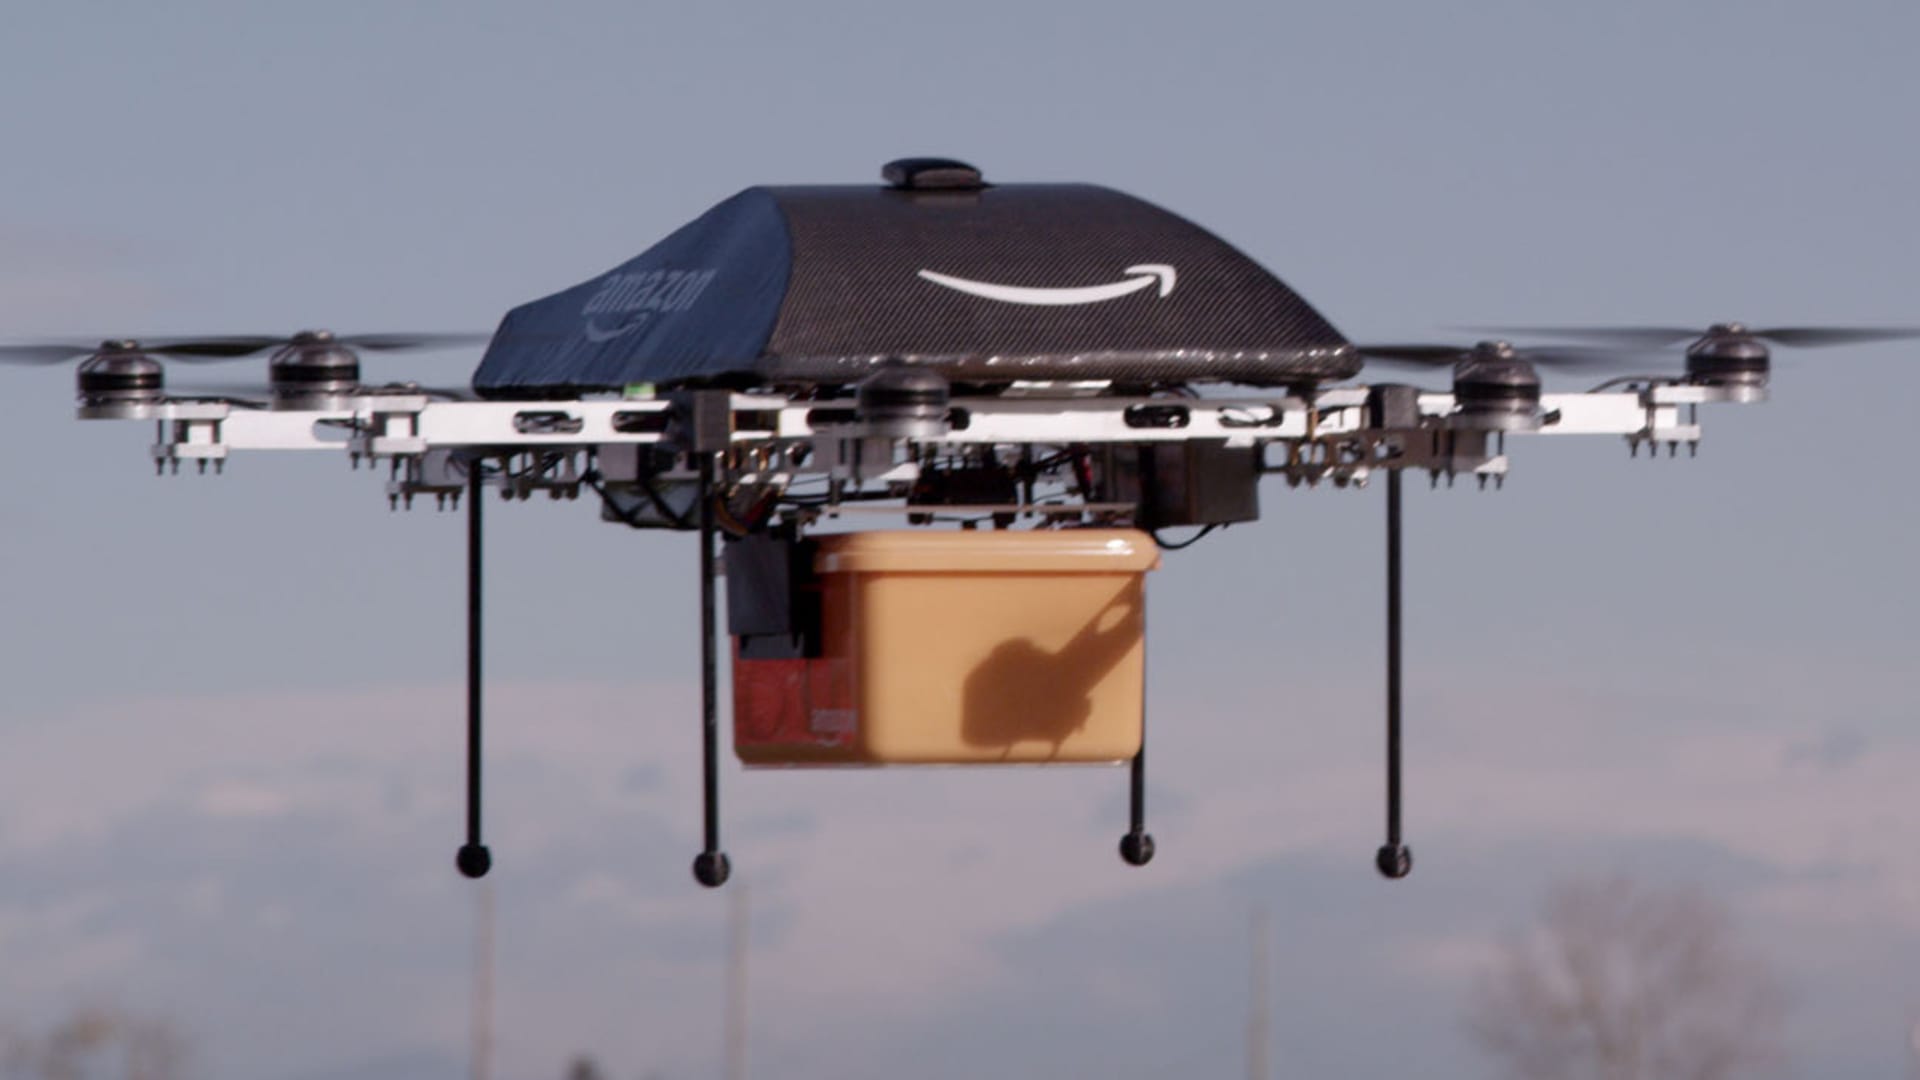 Amazon plans to start delivering packages by drone in Texas later this year